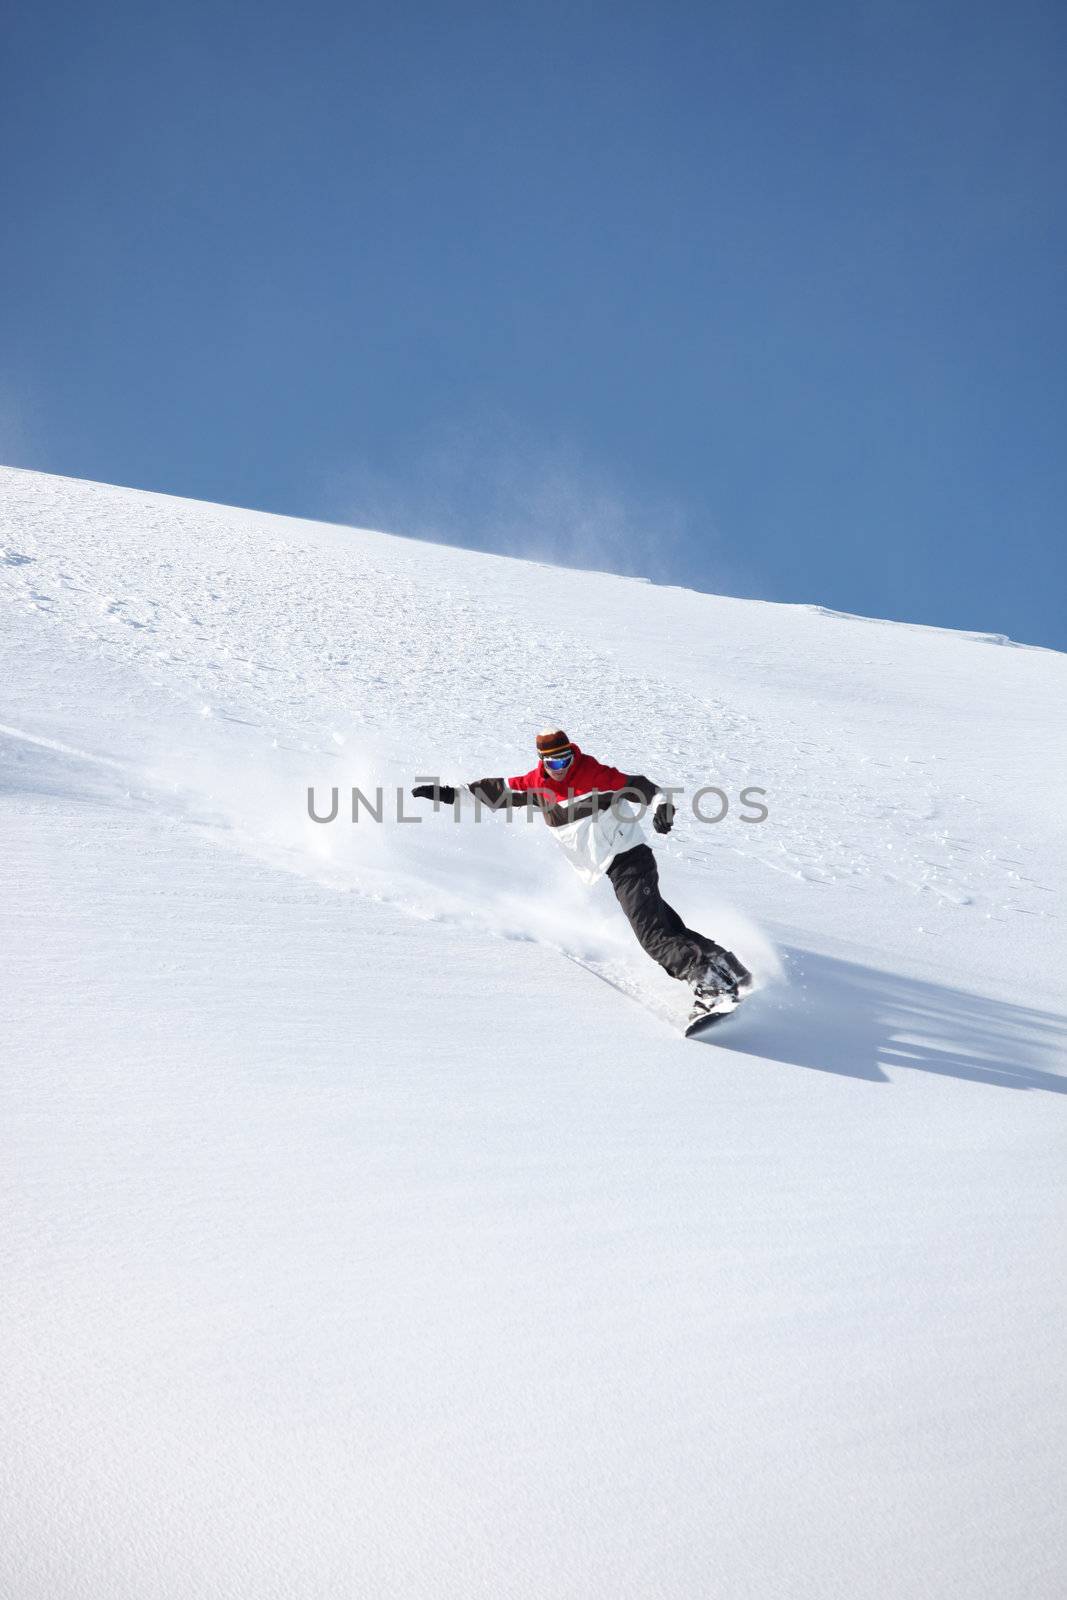 Man snowboarding down hill by phovoir